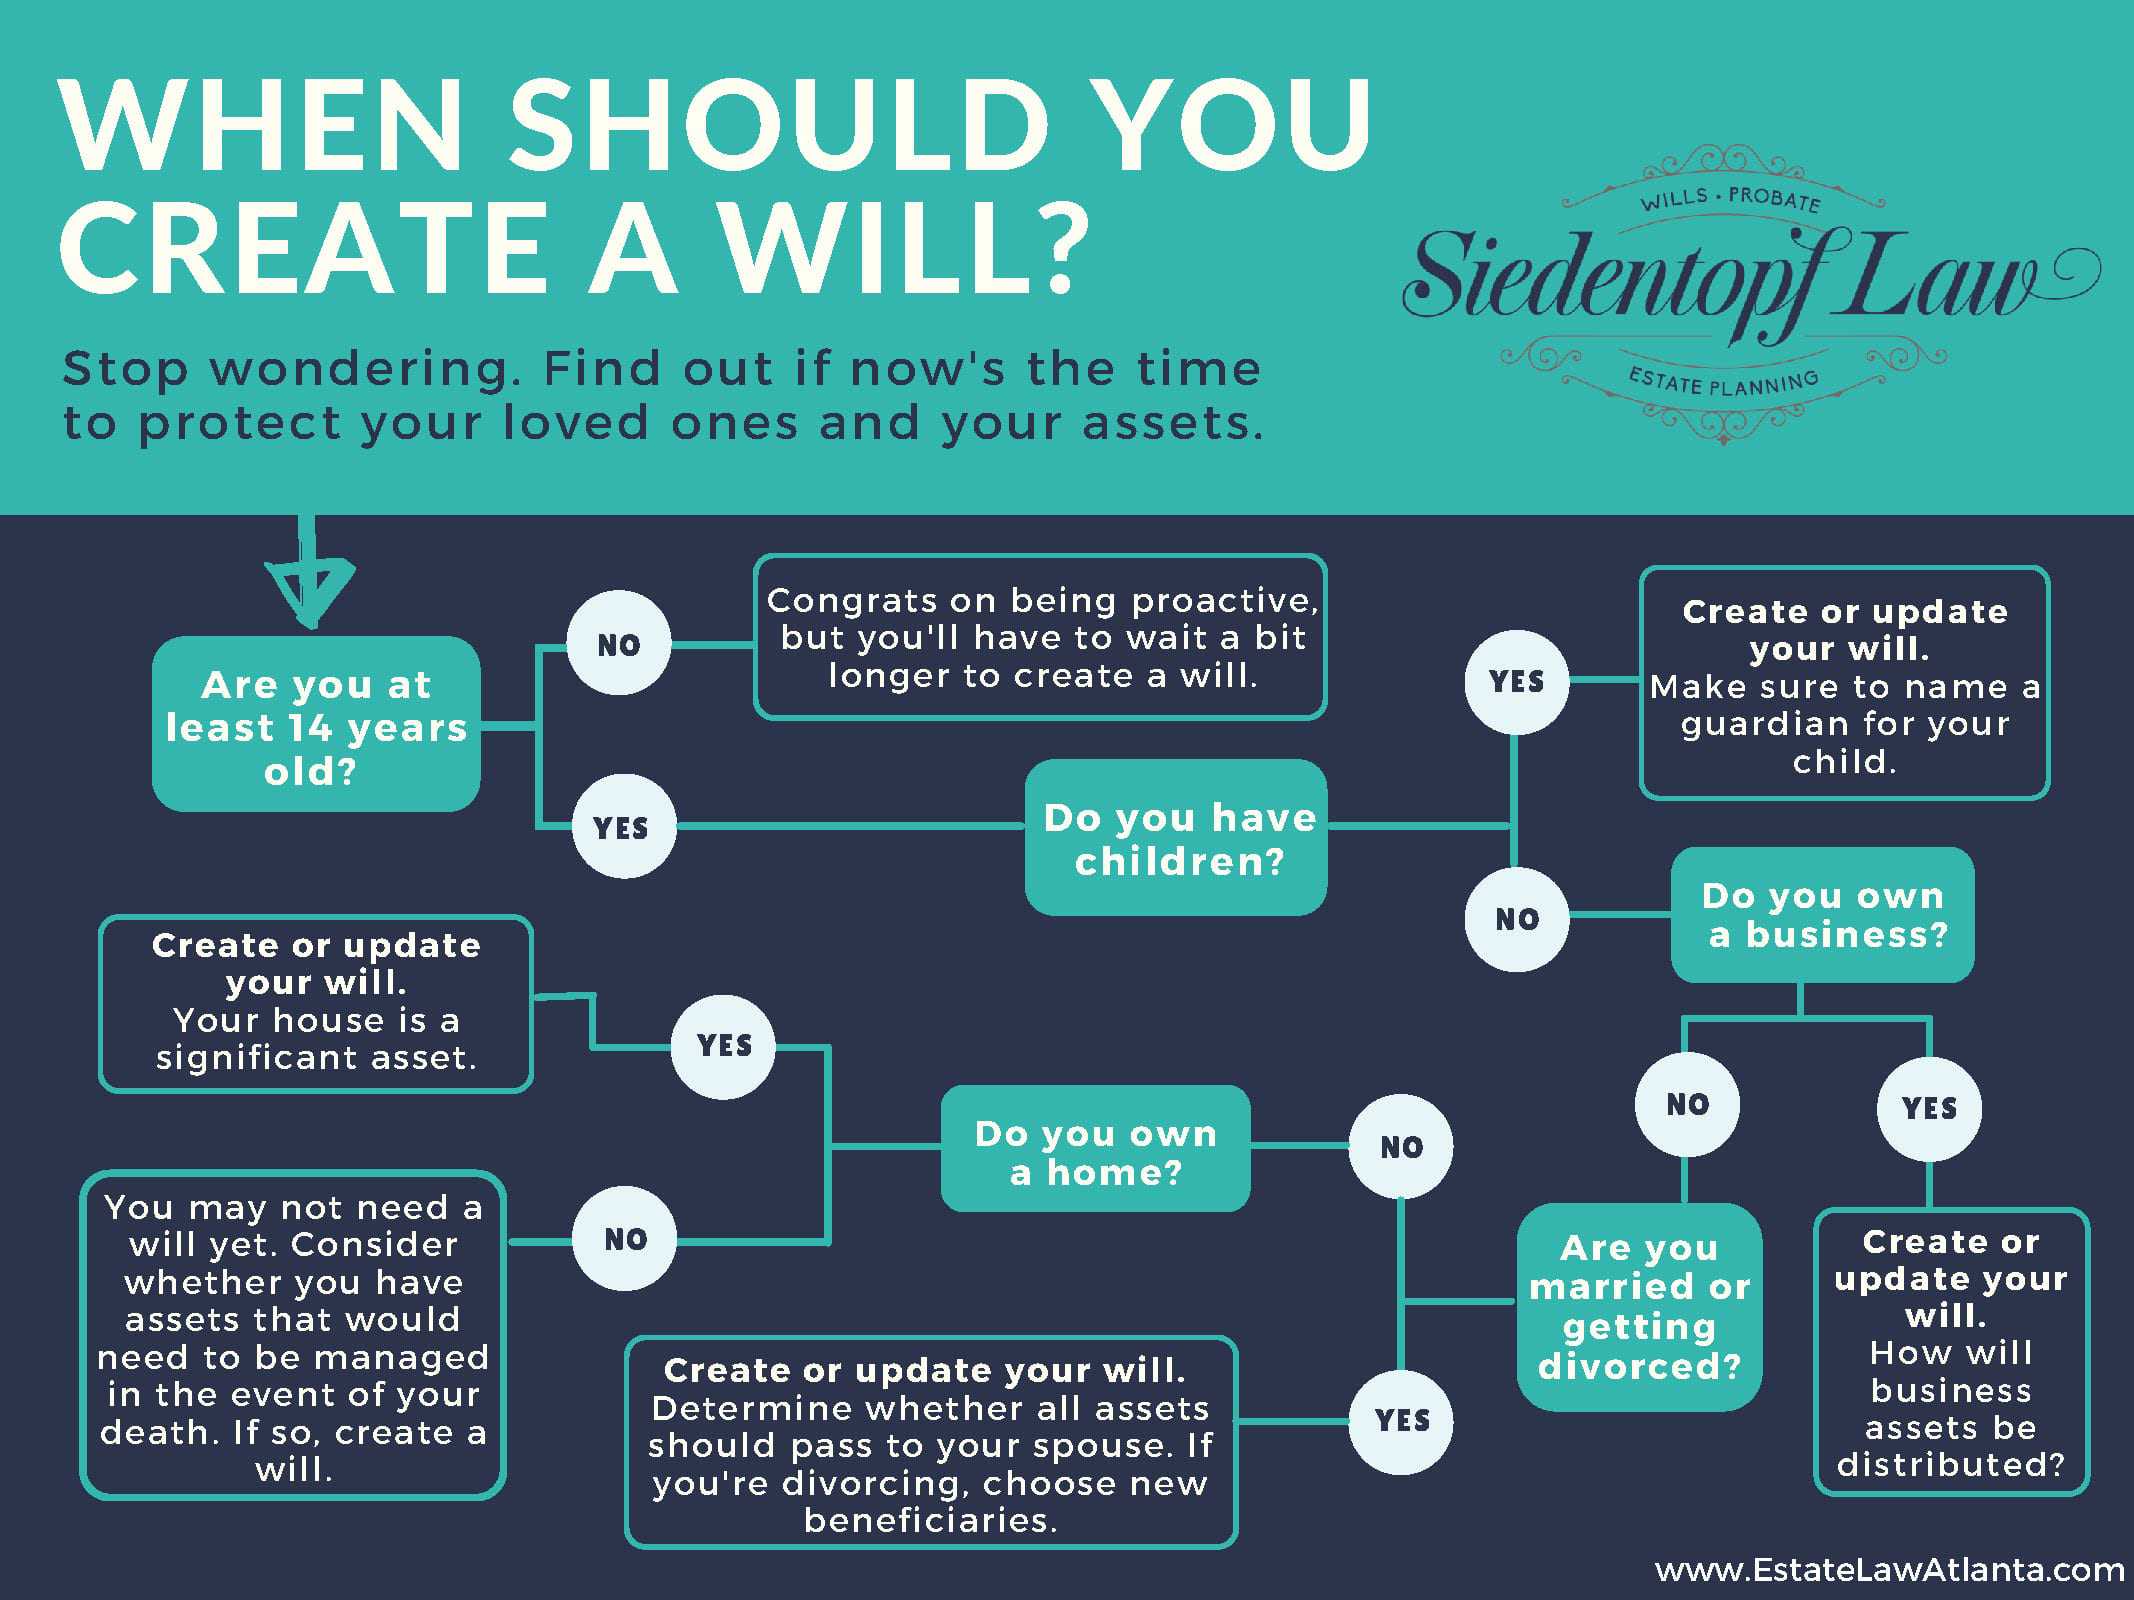 When Should You Create a Will